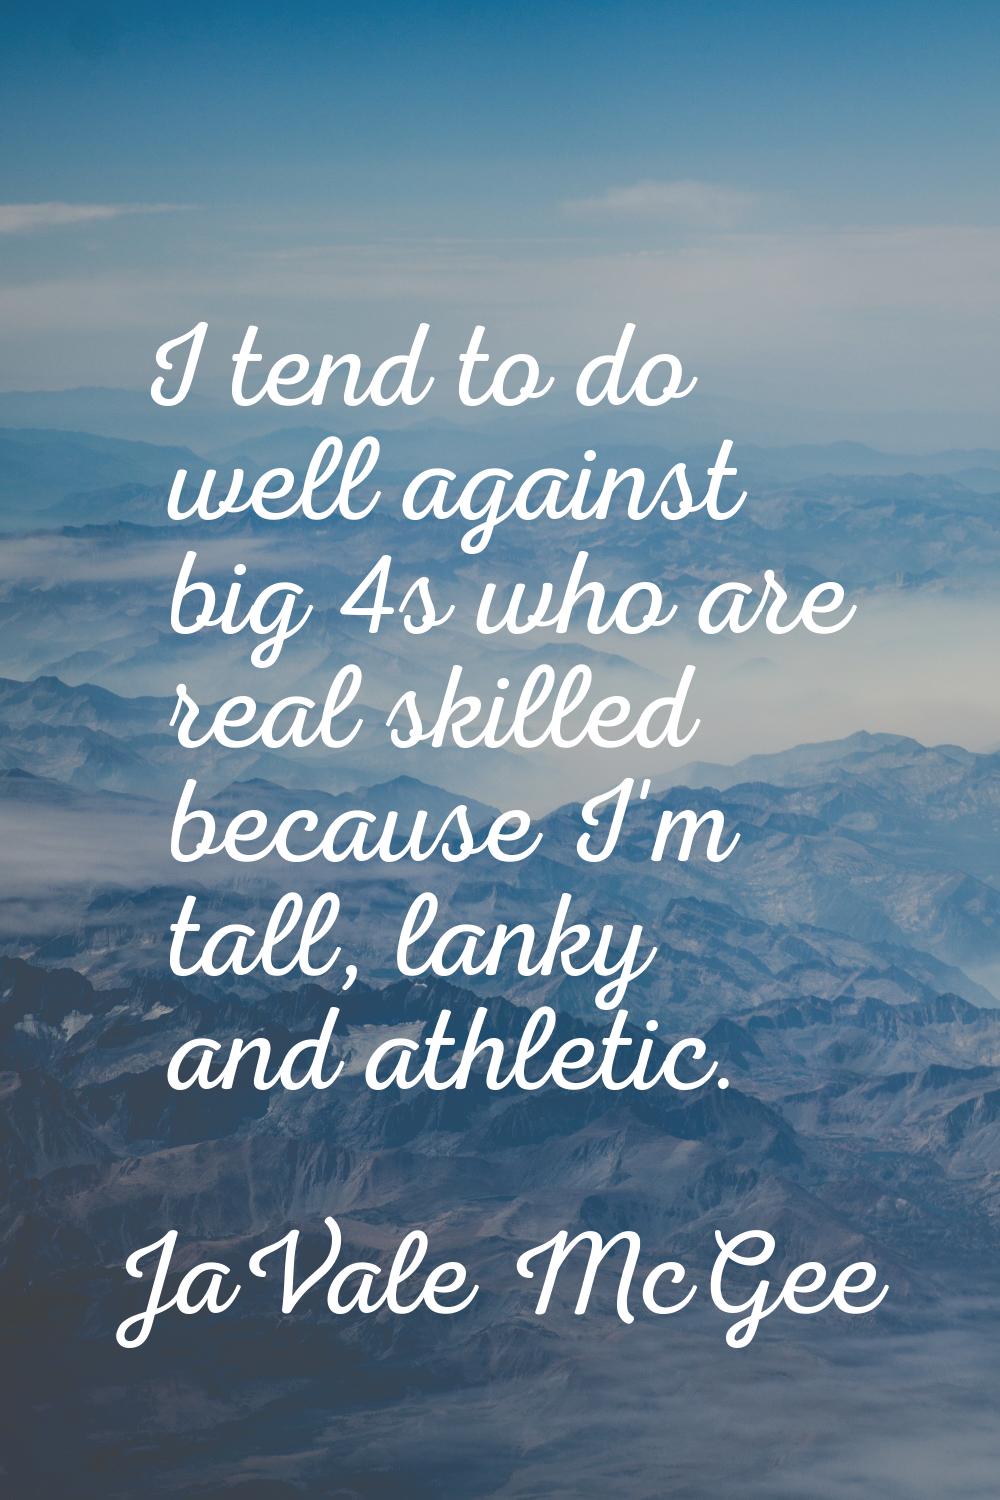 I tend to do well against big 4s who are real skilled because I'm tall, lanky and athletic.